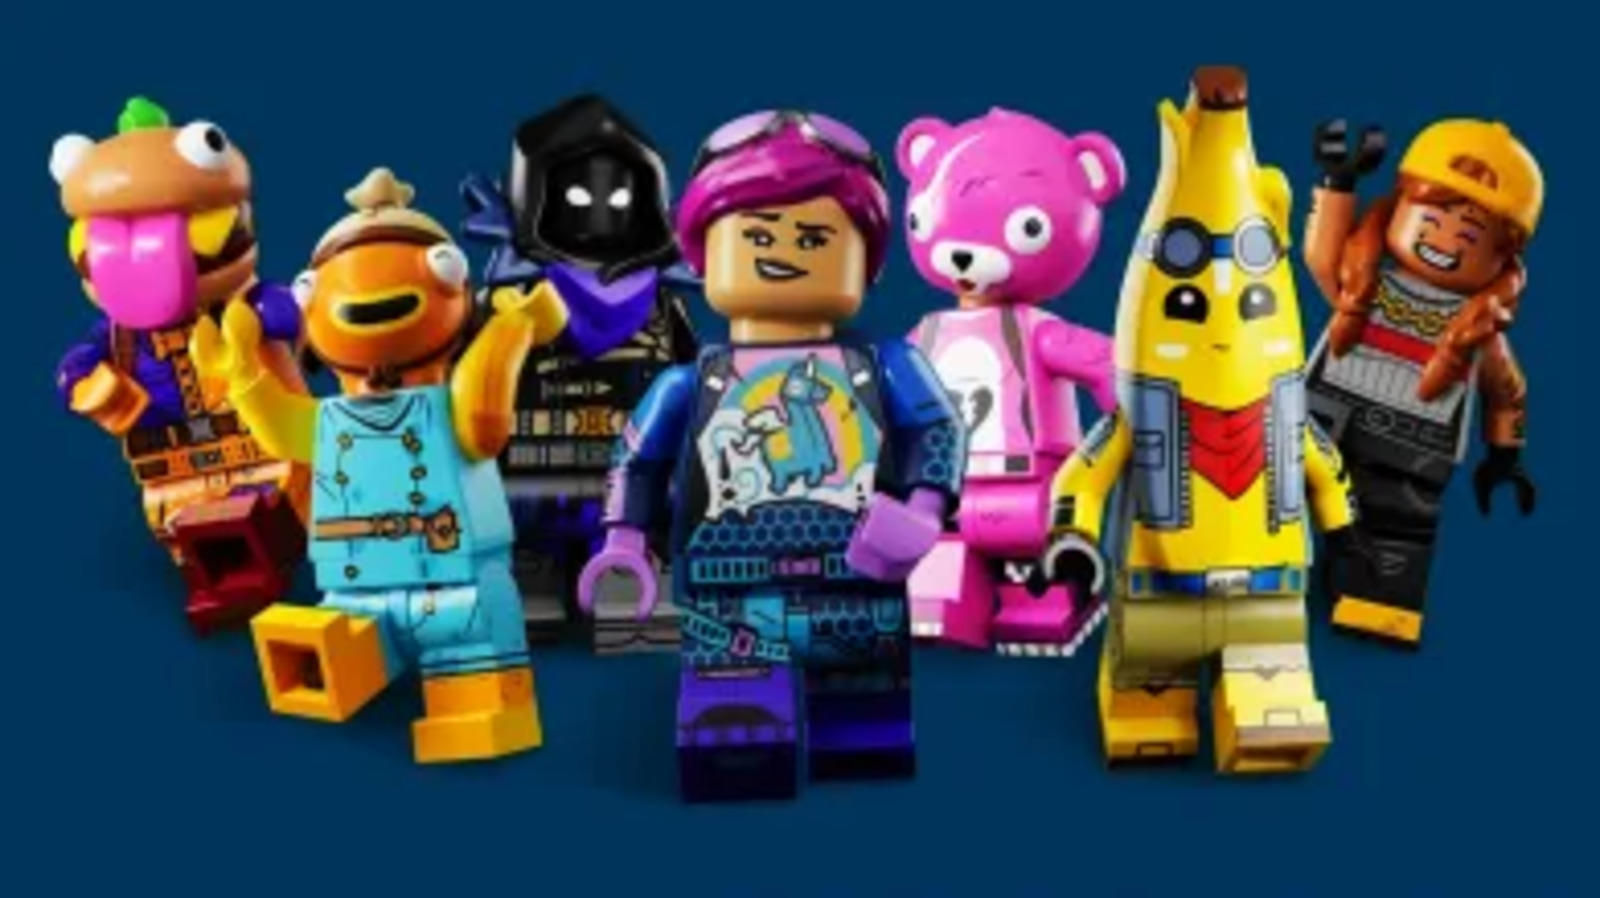 Fortnite LEGO: Fortnite LEGO: Know release date, game features, skins, sets  and more - The Economic Times